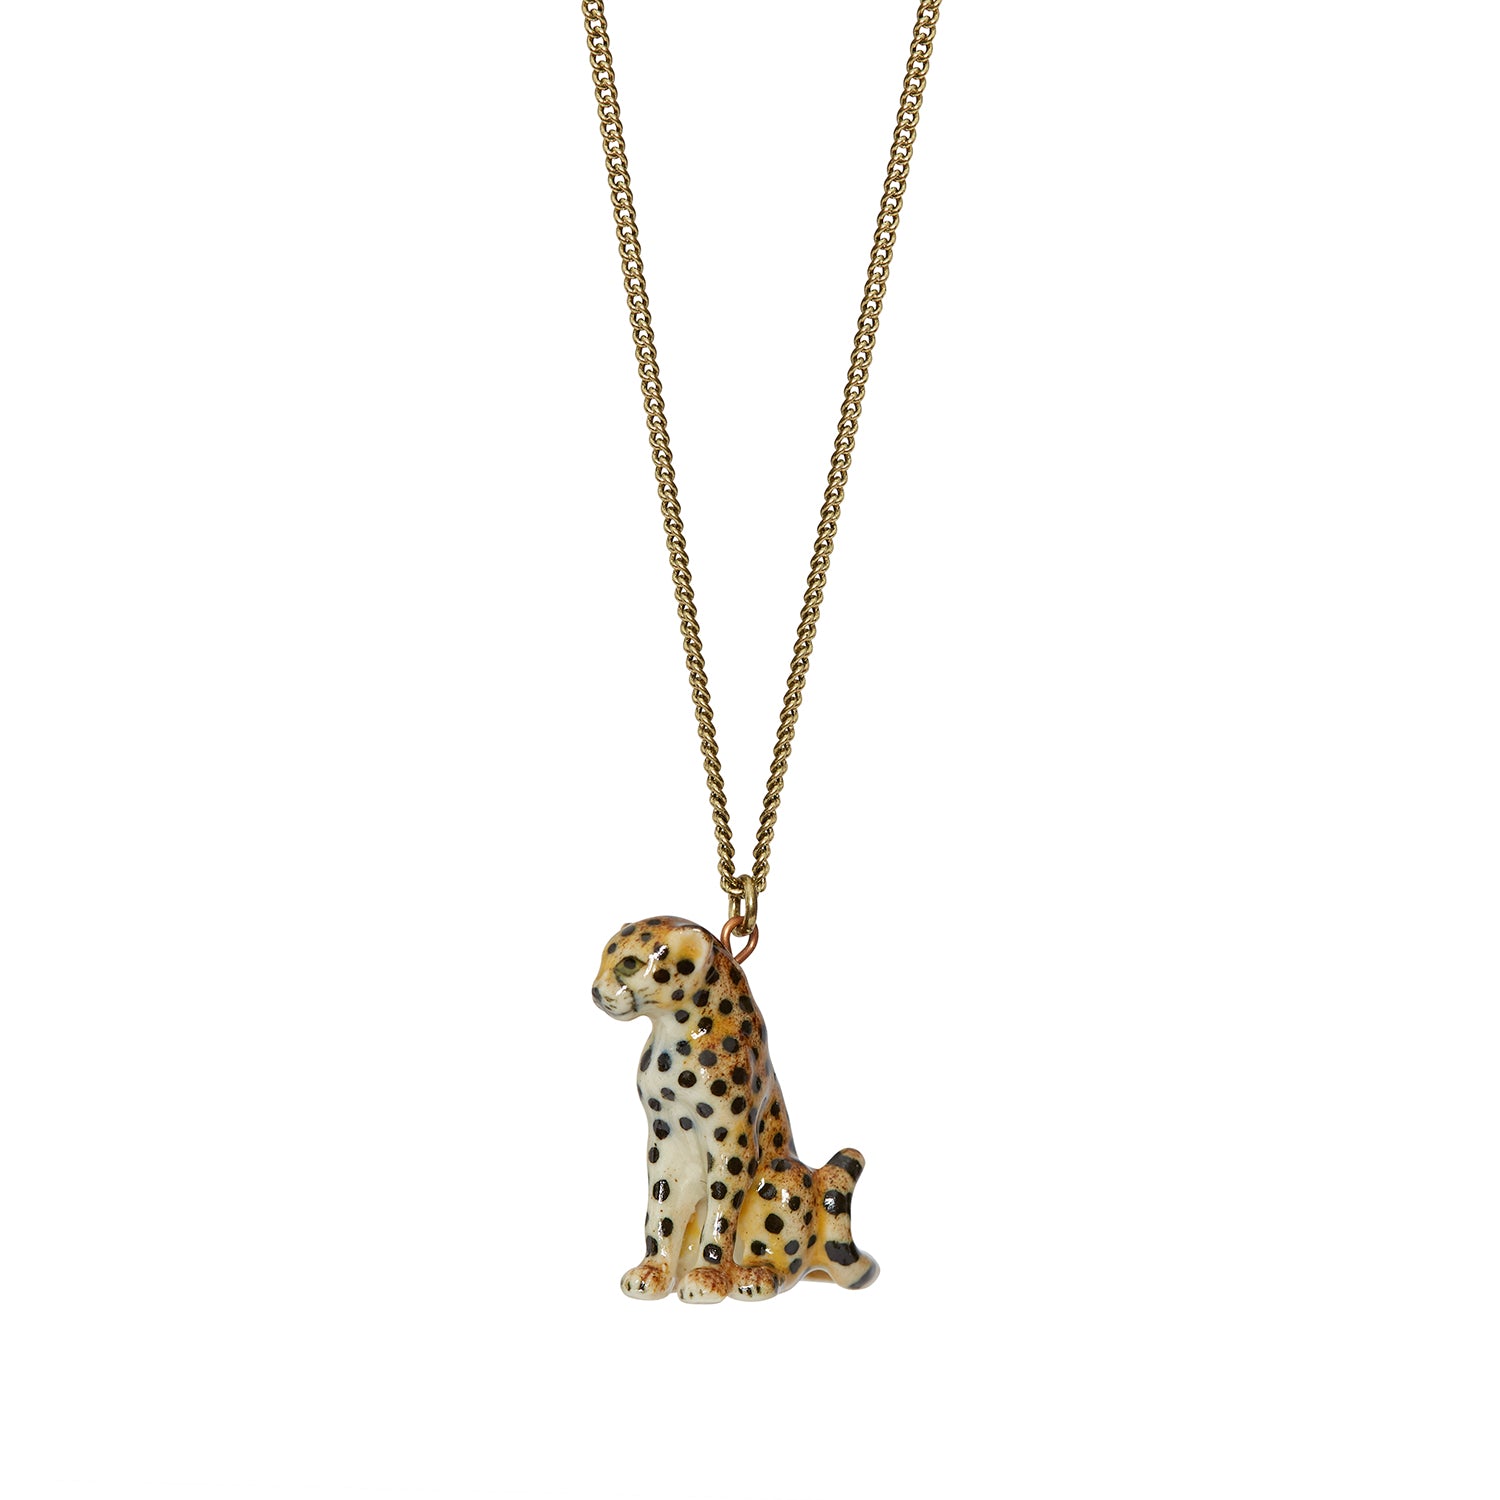 Small Sitting Cheetah Necklace